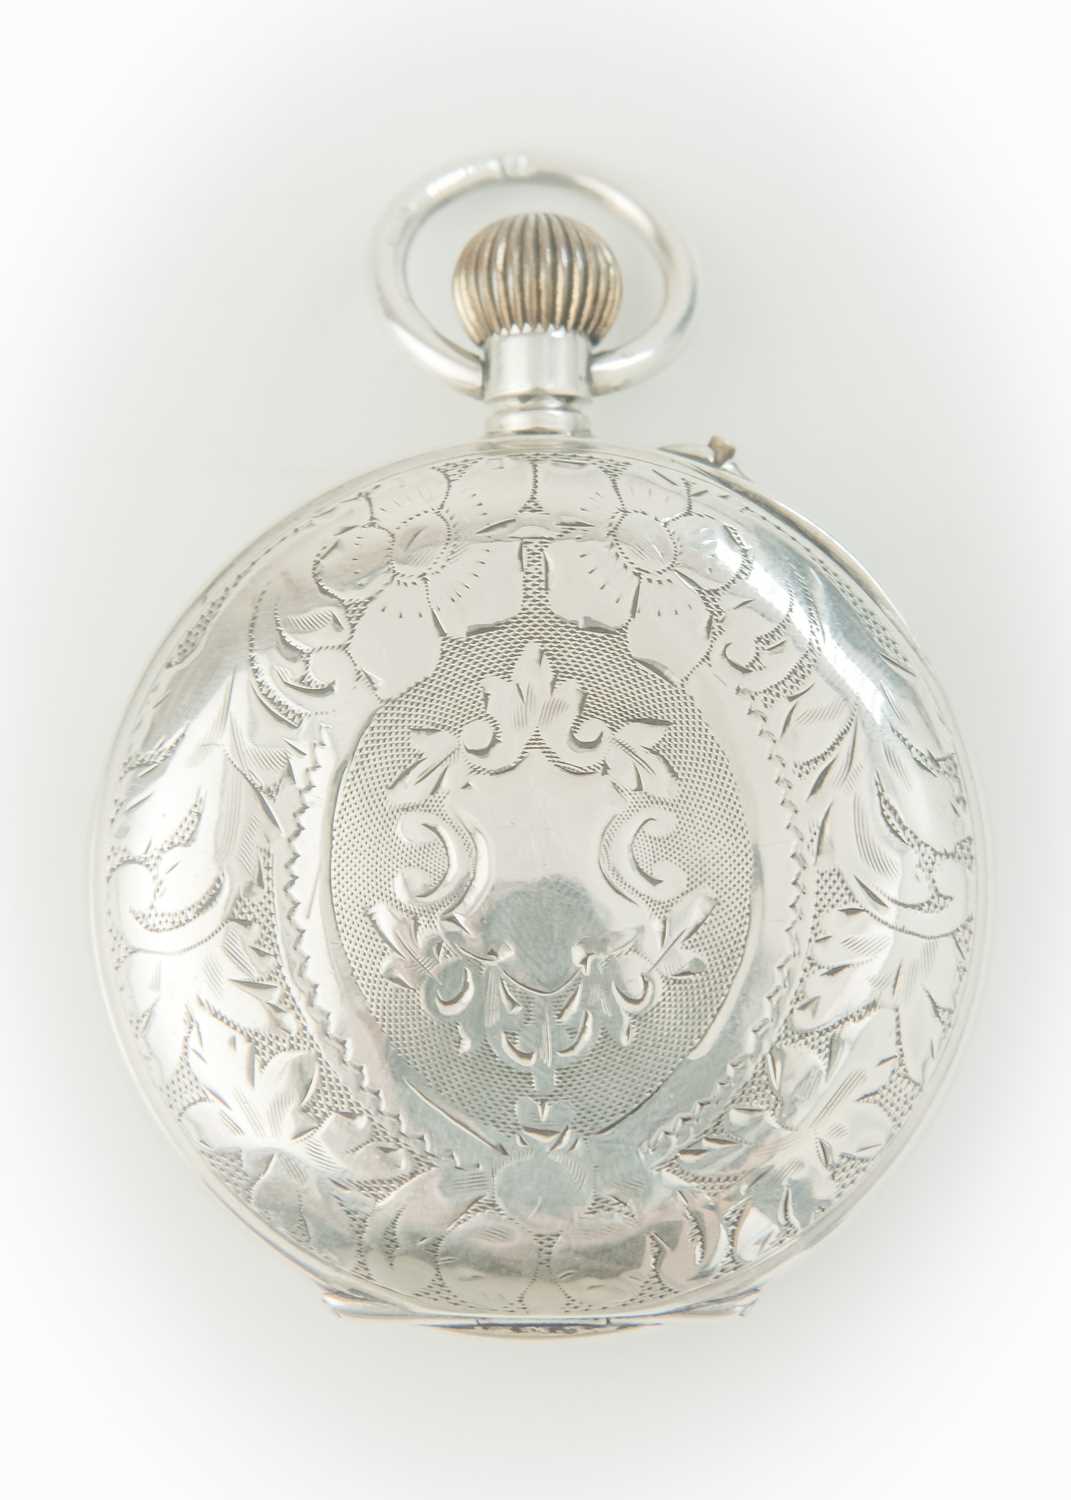 A silver cased crown wind pocket watch with visible escapement dial. - Image 4 of 5